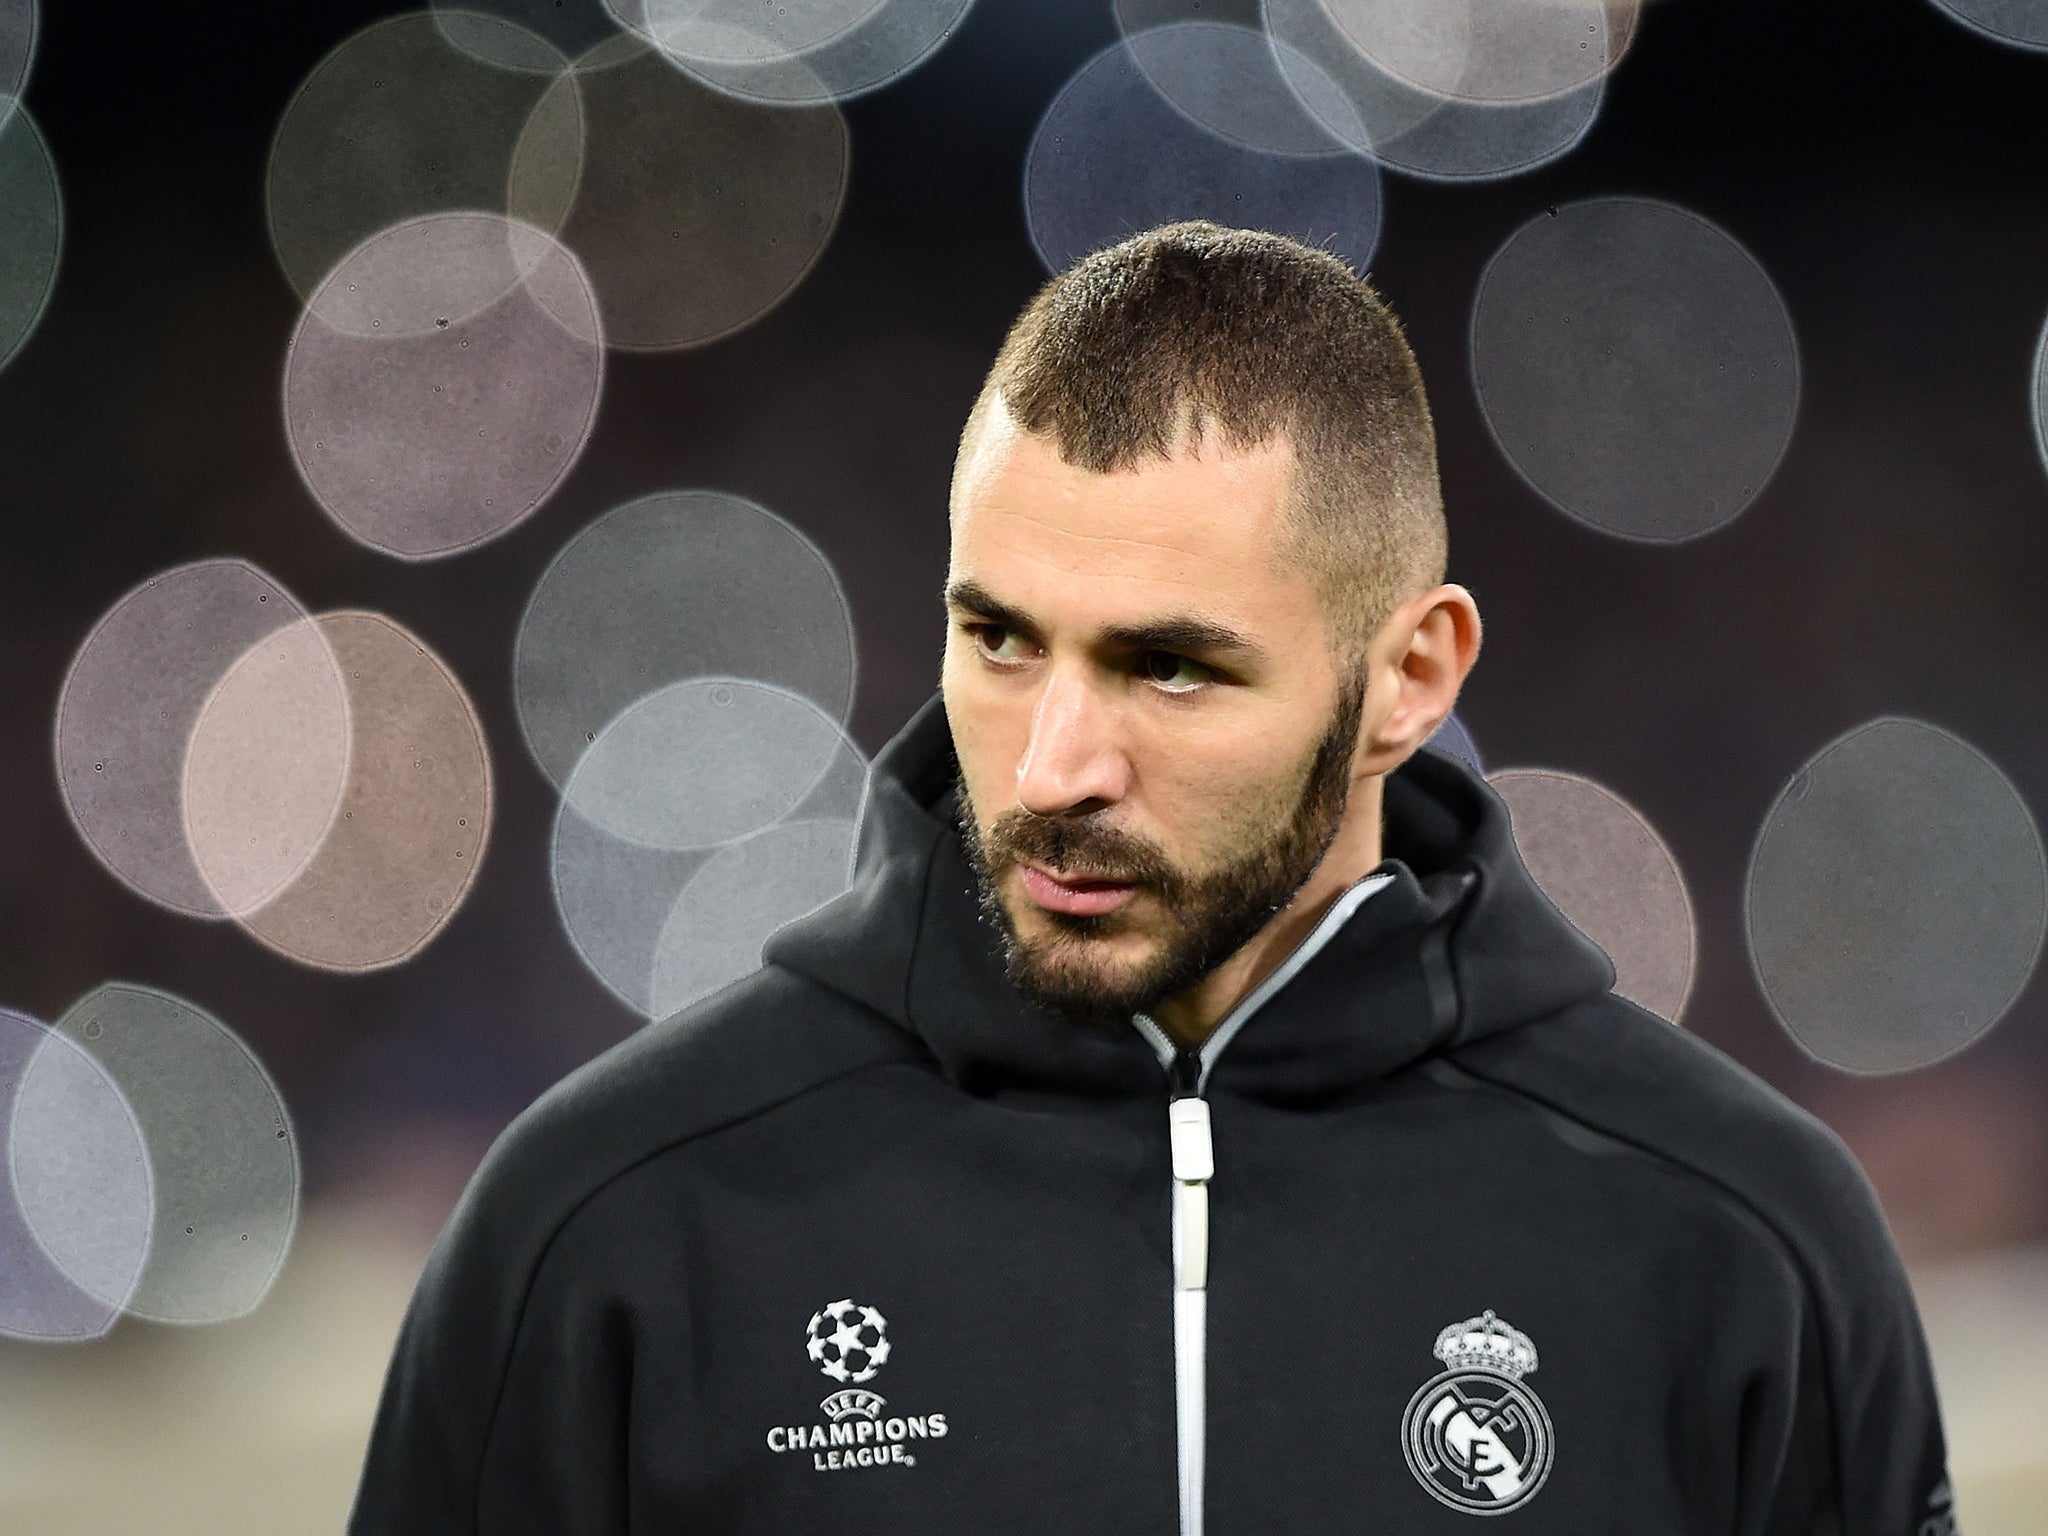 Benzema has been a consistent former for Real Madrid